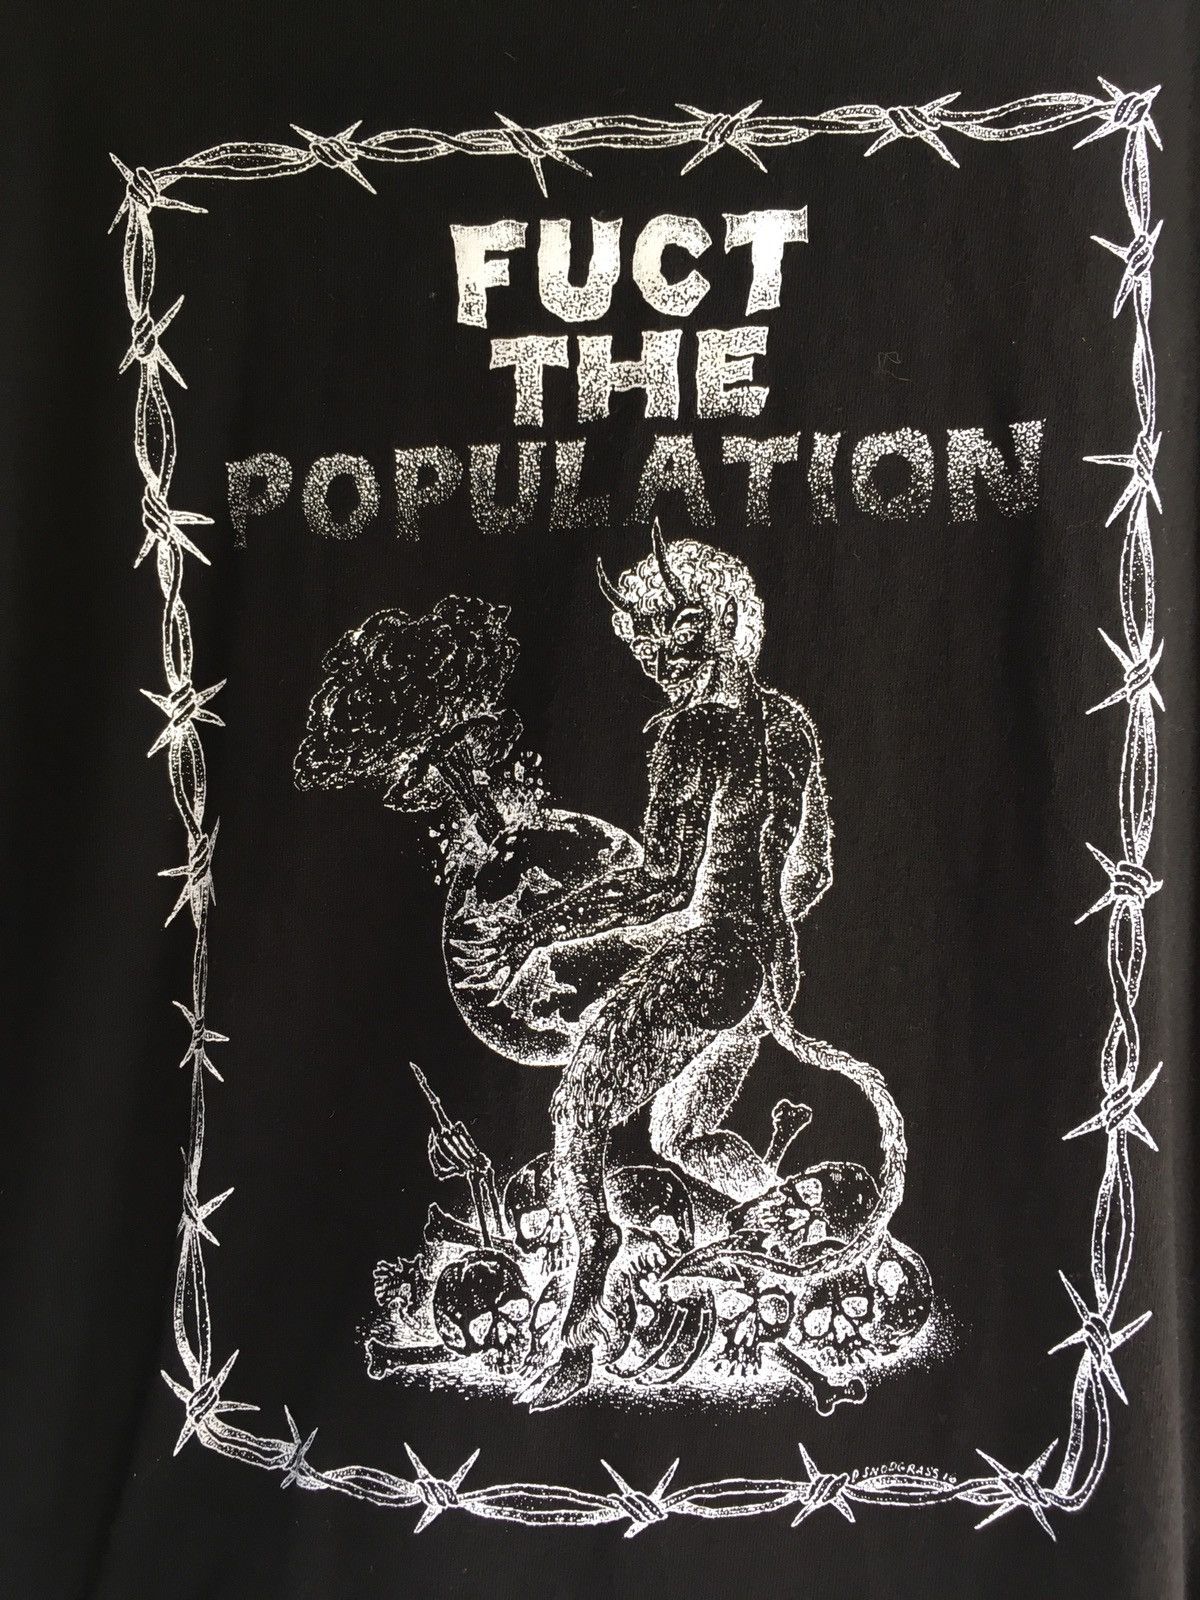 Fuct FTP X Fuct “Fuct The Population Devil Tee” Size US L / EU 52-54 / 3 - 2 Preview